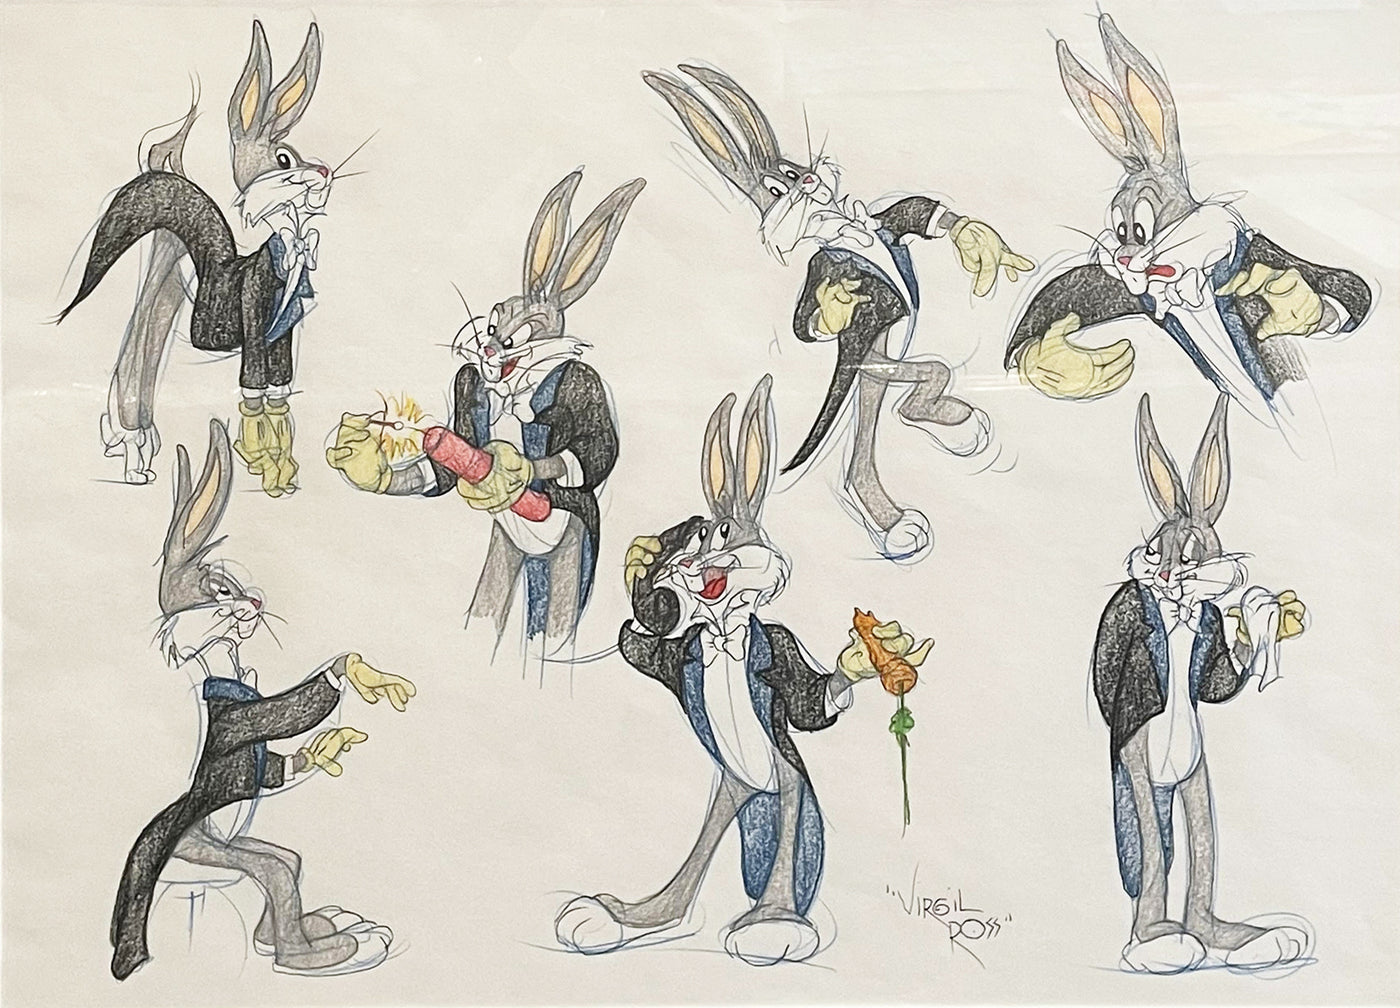 Original Warner Brothers Virgil Ross Model Sheet Animation Drawing featuring Bugs Bunny